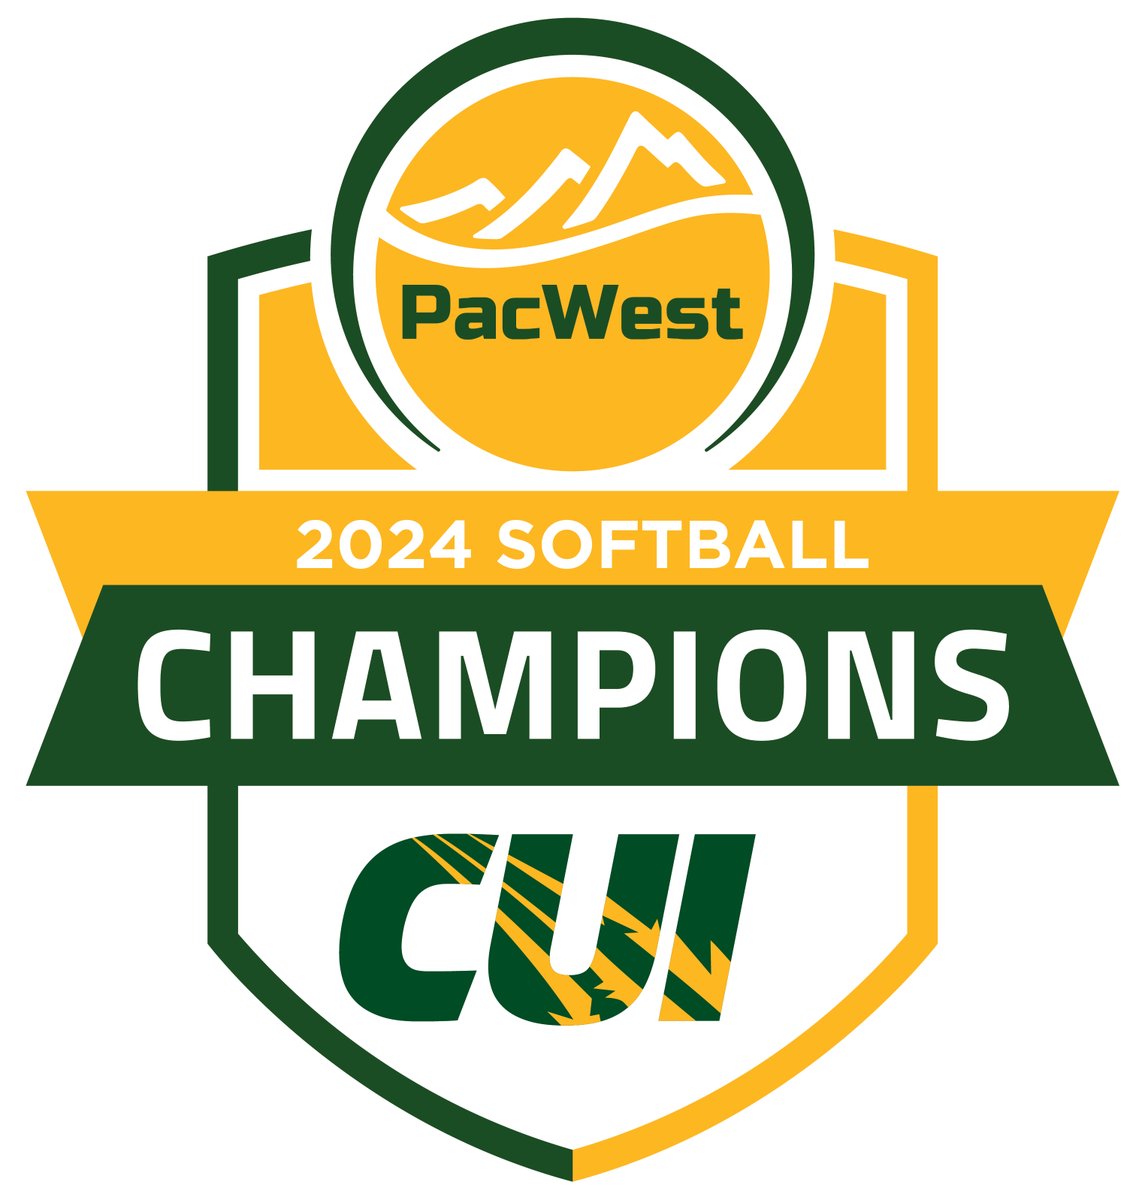 Congrats to our Pacific West Conference tournament champion Concordia!